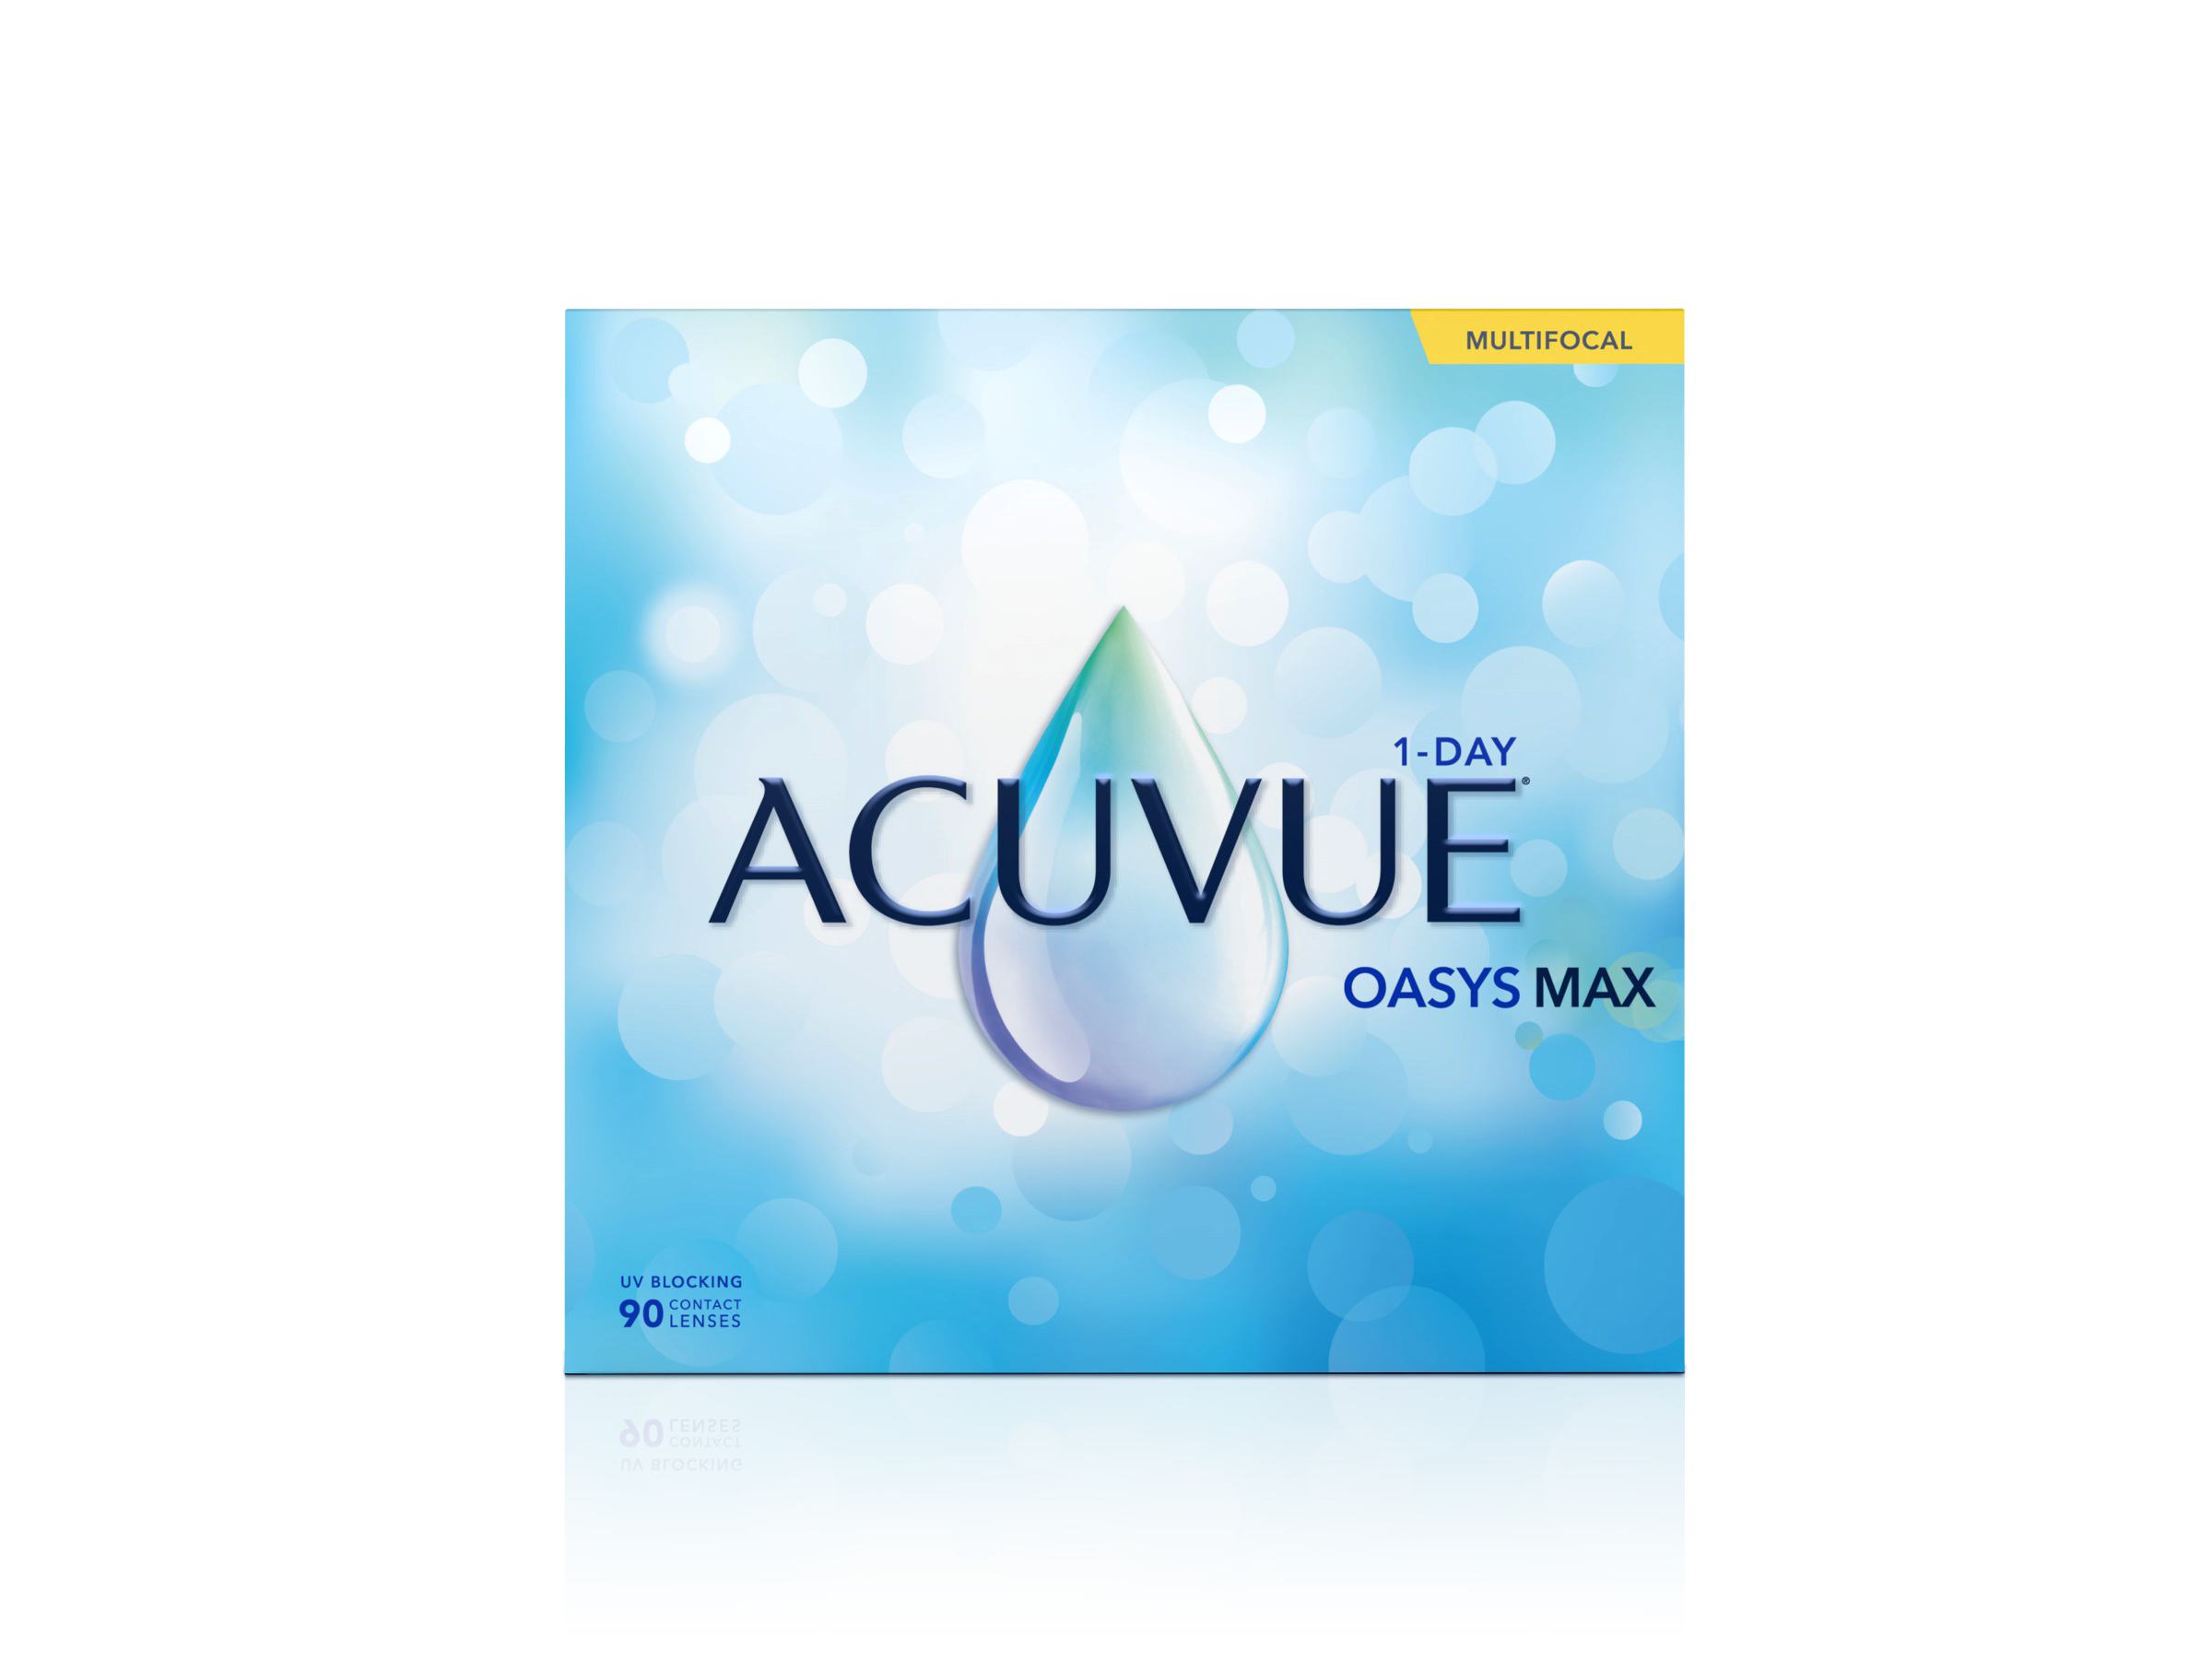 Acuvue Oasys Max 1-Day Multifocal Mid Add 90 Pack large view angle 0